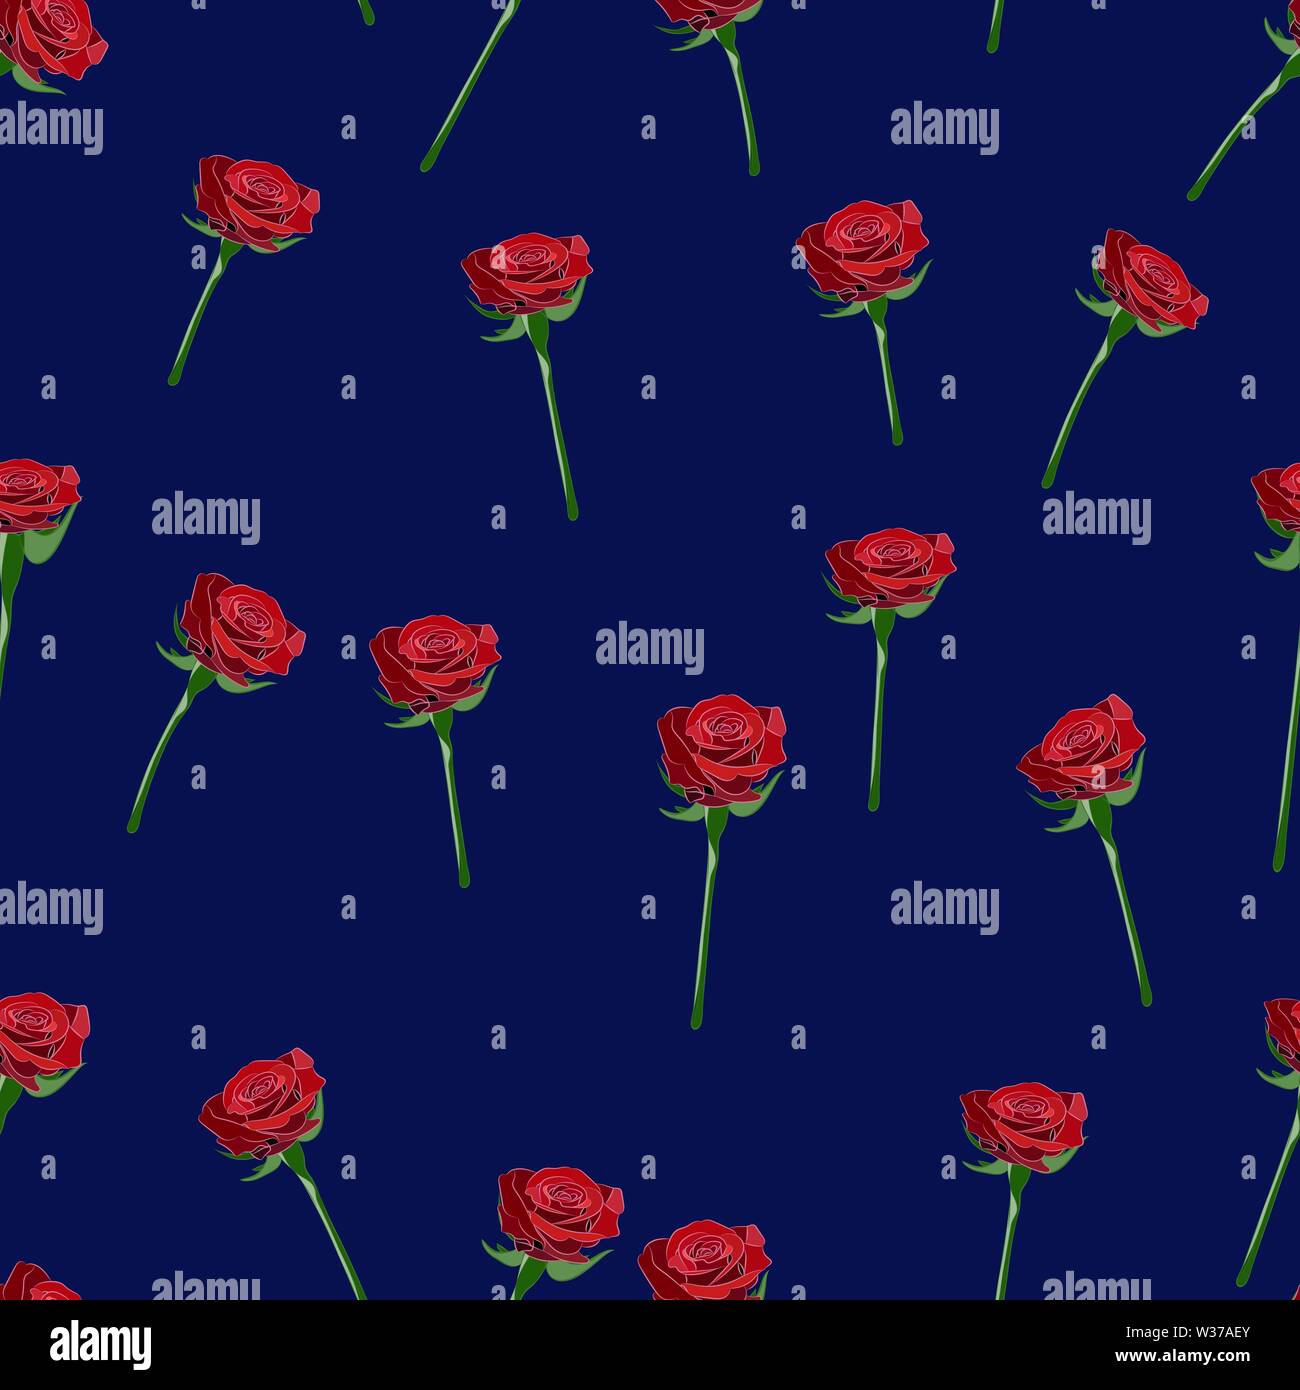 Vector seamless pattern with red rose button on the stem and branches on a dark-blue background. Stock Vector